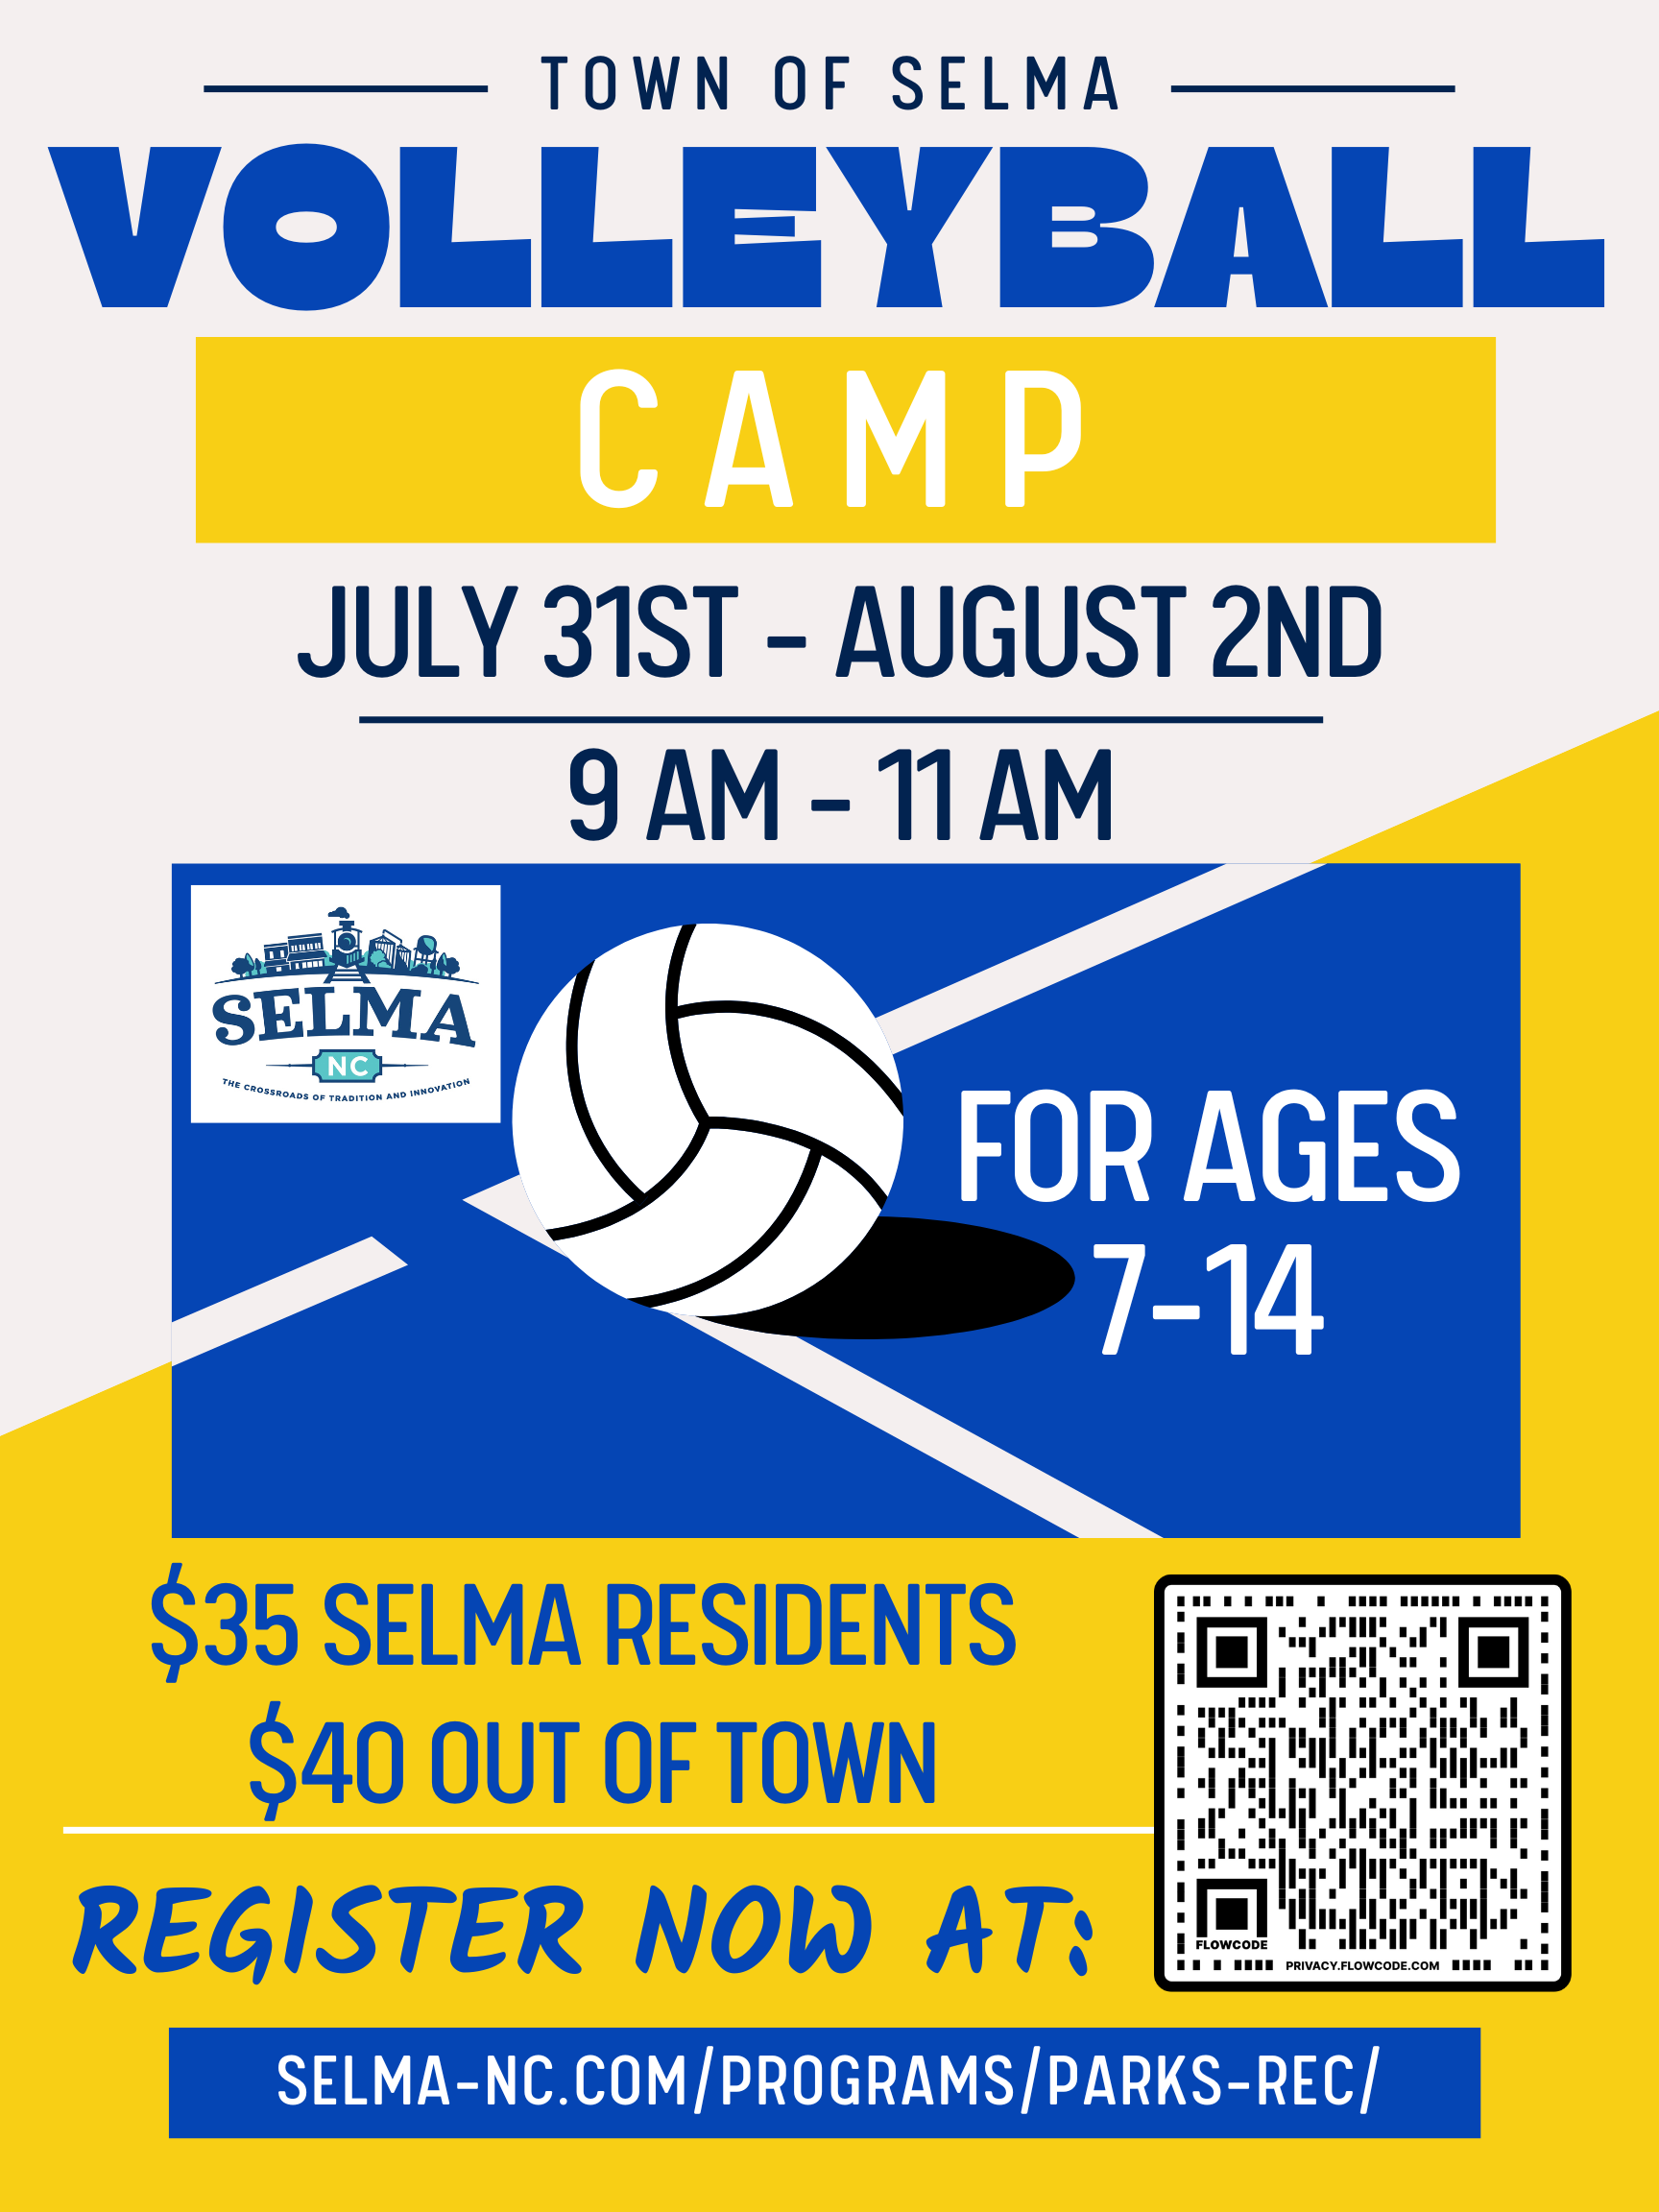 Volleyball Camp - Town of Selma